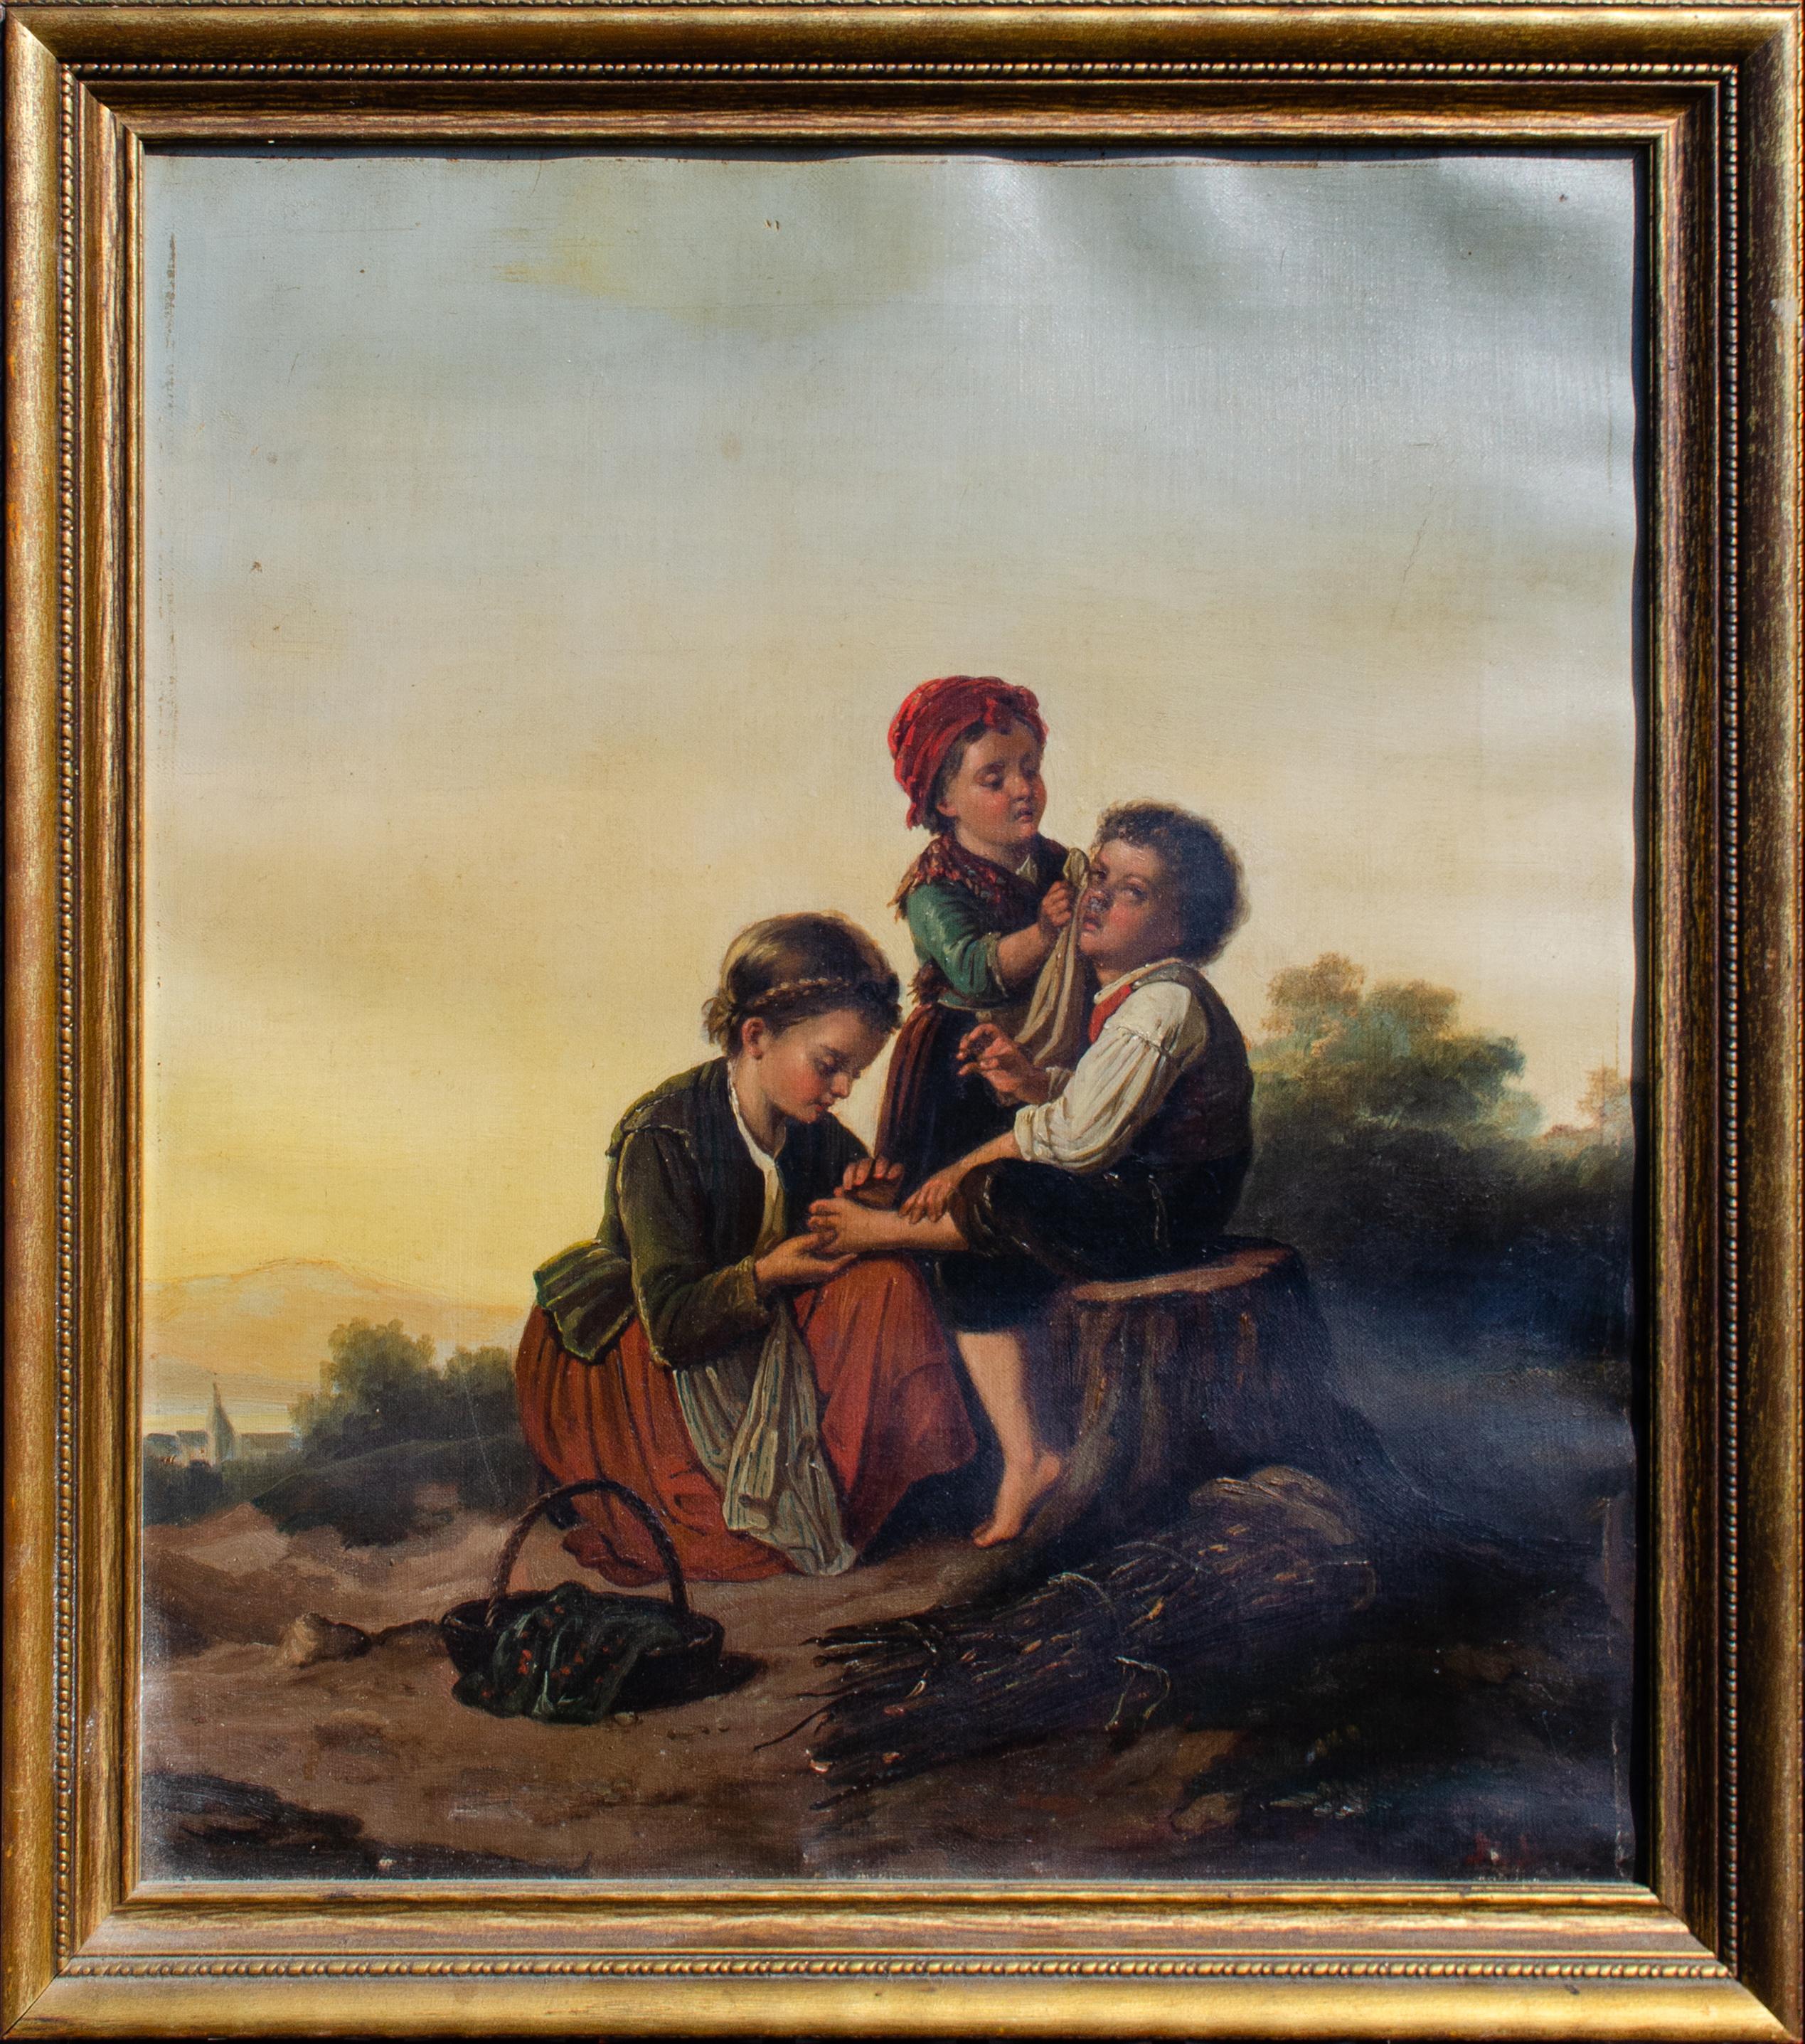 Untitled Pair of Portraits, c. late 19th century
Oil on canvas
20 x 16 in.
Framed: 22 x 19 1/4 x 1 in.
One painting initialed lower right
Both inscribed verso on stretcher bar
